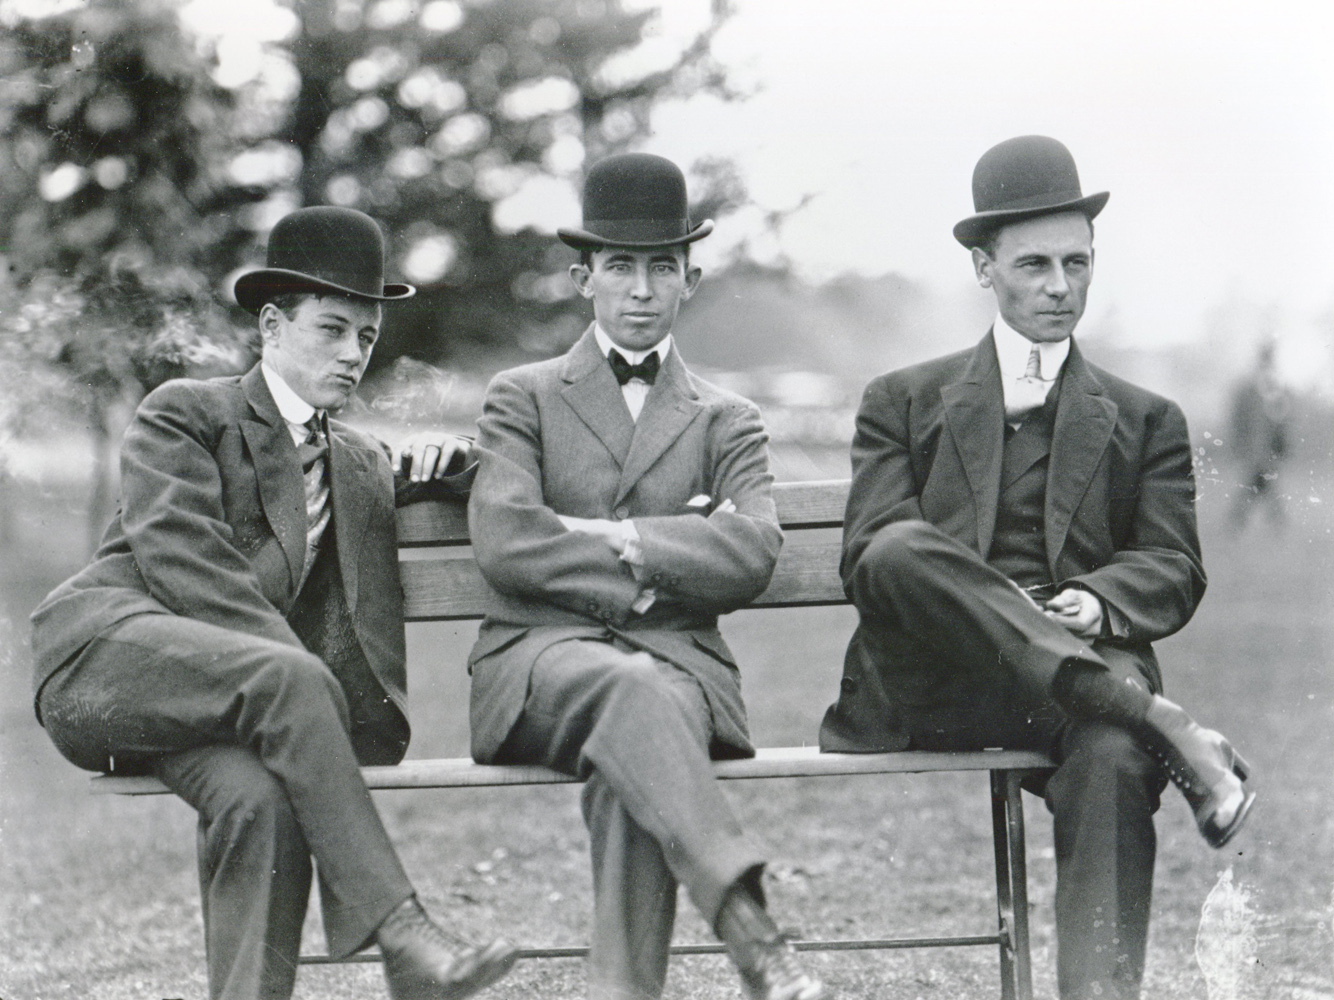 Frank O'Neill, Tommy Burns, and Willie Shaw (from left to right) (Keeneland Library Cook Collection/Museum Collection)